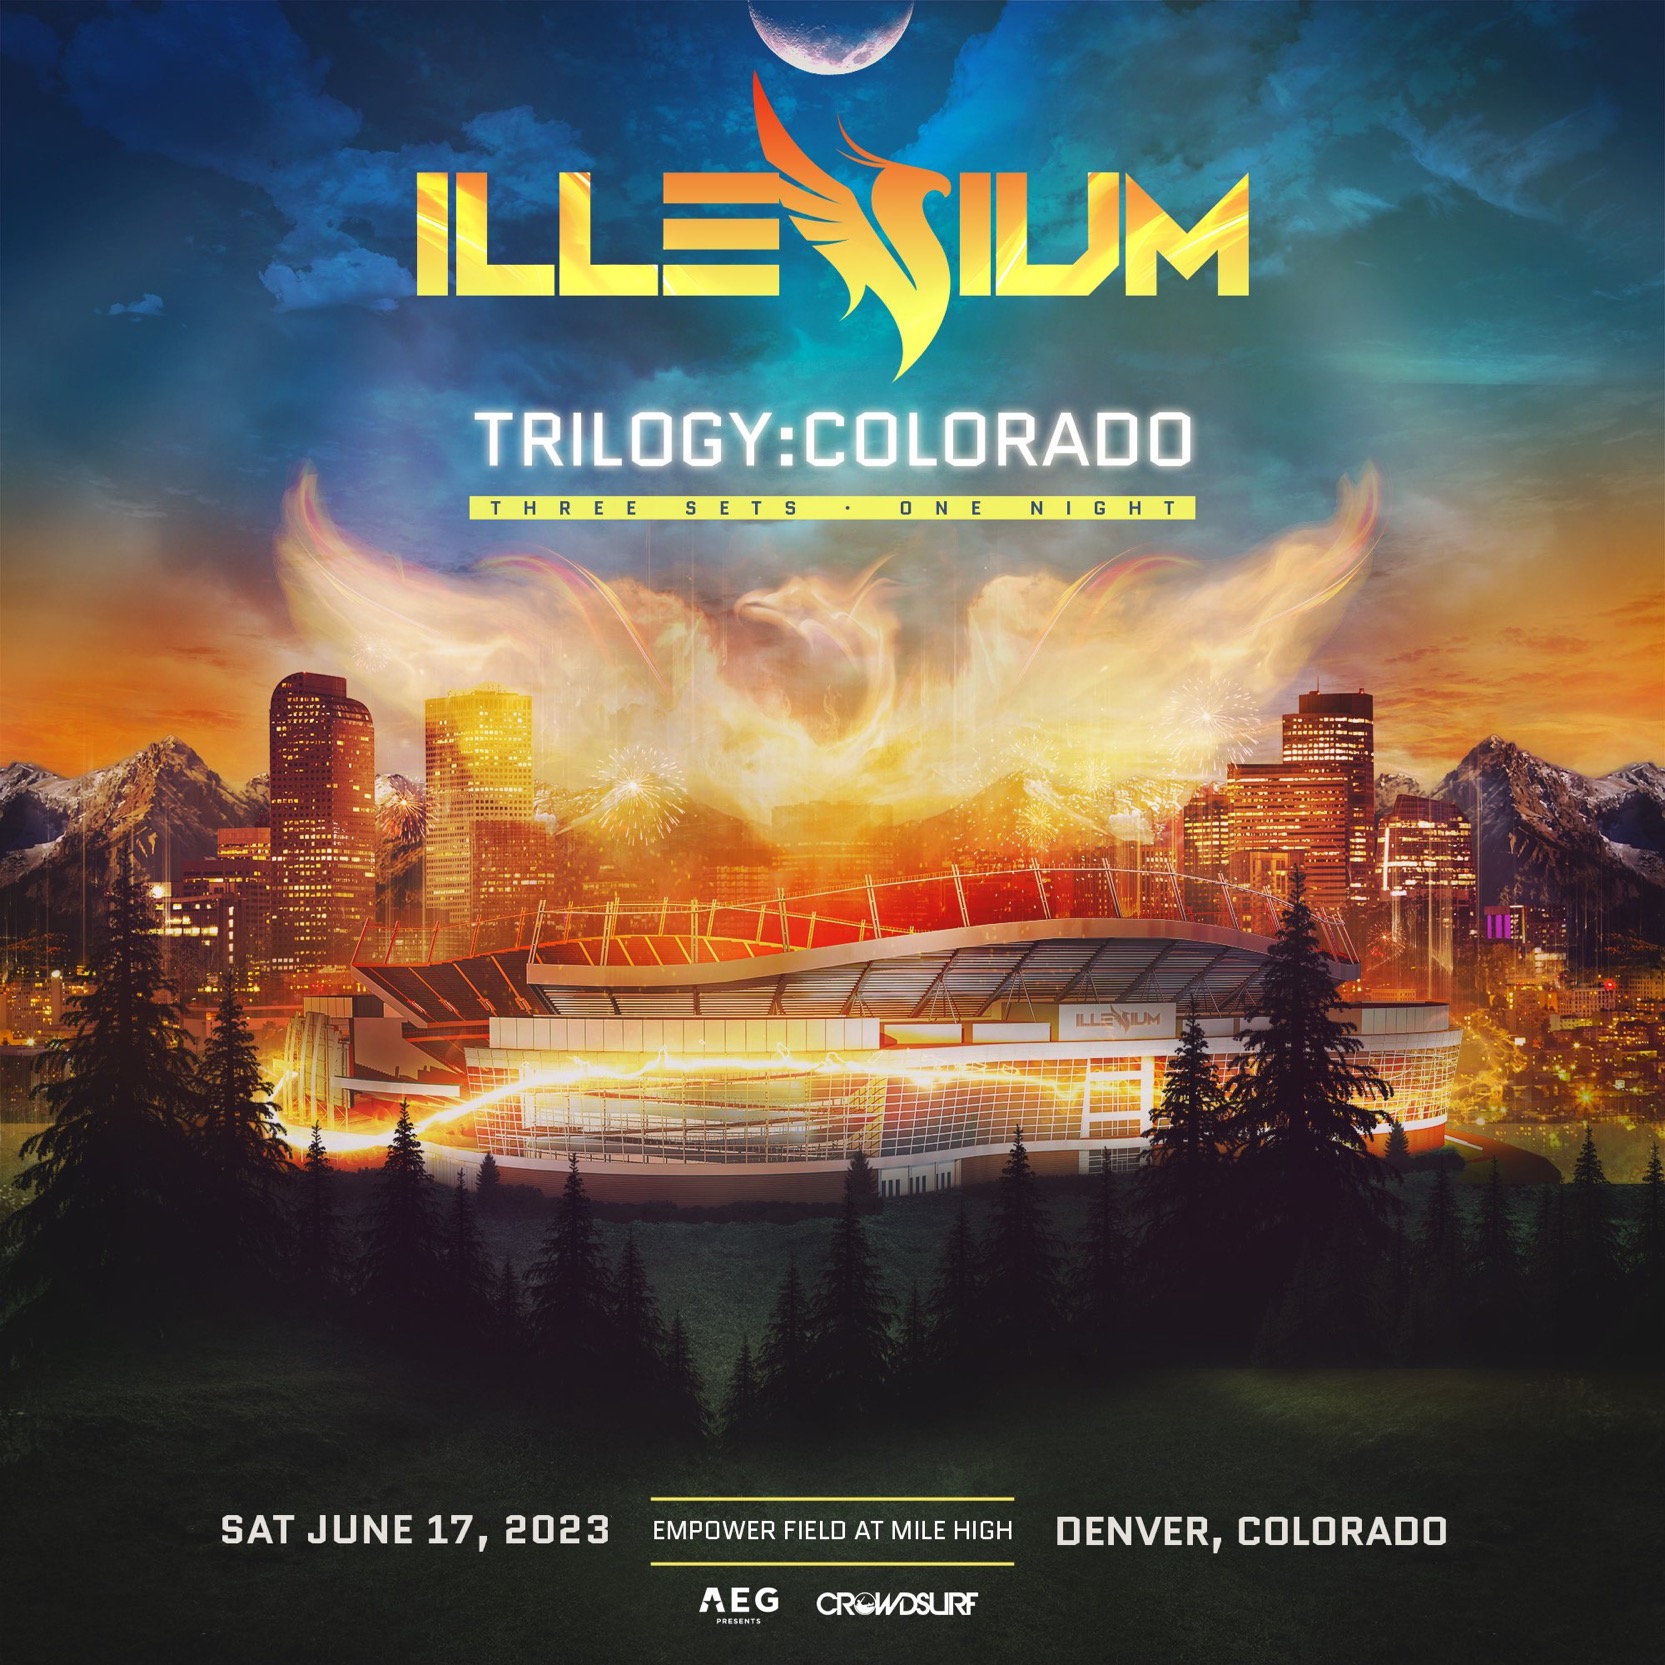 A Year After, ILLENIUM Plans 2nd Trilogy in Denver, CO image